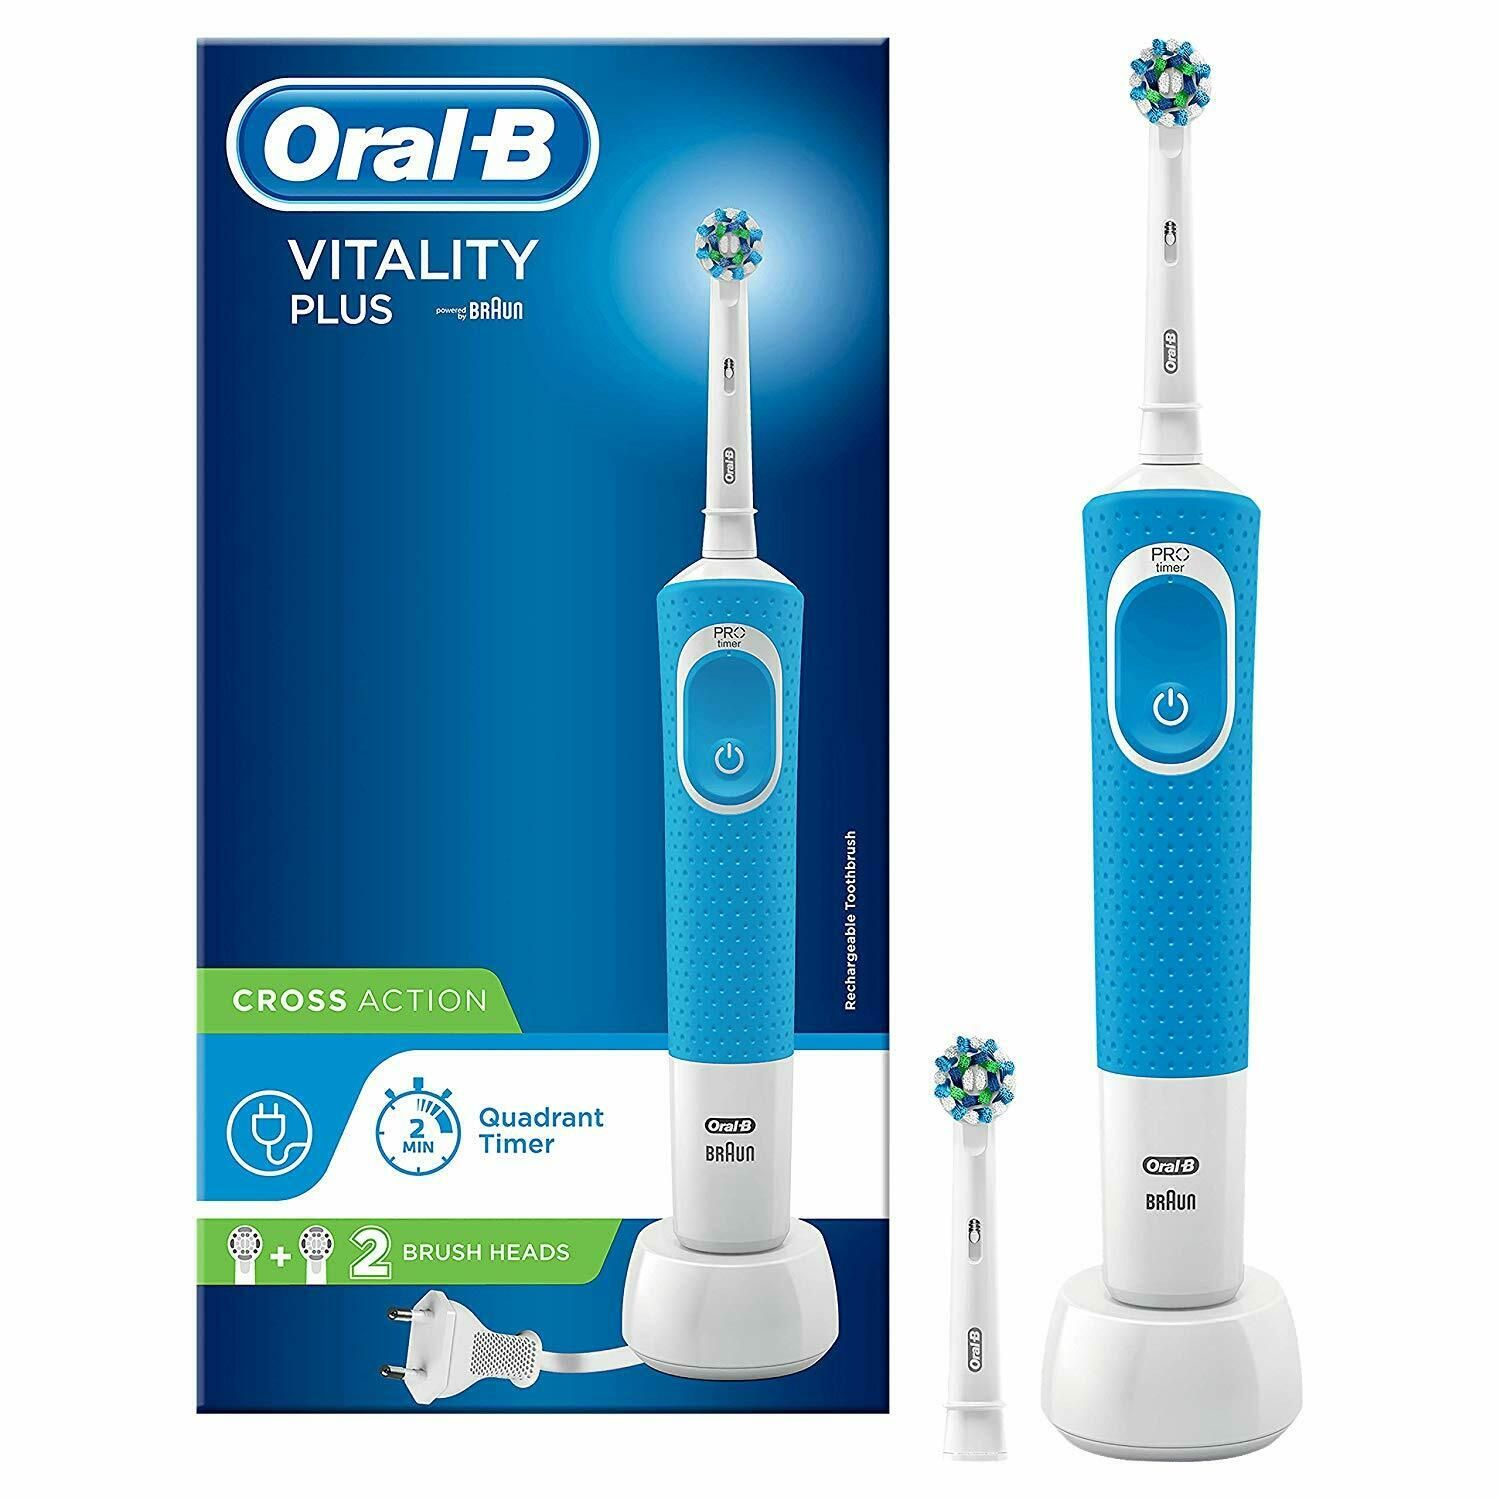 Oral-B Vitality Plus Cross Action Electric Toothbrush With 1 Handle & 2 Brush Head

Rechargeable brush with one mode and one brush head - 2D cleaning, ships with 2 pin plug. The Oral-B vitality electric toothbrush provides a clinically proven clean versus a regular manual toothbrush. The professionally inspired design of the CrossAction toothbrush head surrounds each tooth with bristles angled at 16 degrees and 2D cleaning action oscillates and rotates for better plaque removal than a regular manual toothbrush. This pack includes two CrossAction toothbrush heads. An in-handle timer helps you brush for a dentist-recommended 2 minutes. A 2 pin cable for charging via 2 pin shaving socket is included. Compatible with the following replacement toothbrush heads: Cross Action, 3D White, Sensi Ultrathin, Sensitive Clean, Precision Clean, Floss Action, Tri Zon, Dual Clean, Power Tip, Ortho Care.

Discover the next level of oral care technology, brought to you by Oral-B, a worldwide leader in toothbrushes *. Each Oral-B electric toothbrush provides a better clean vs. a regular manual toothbrush. Find your electric toothbrush from Oral-B - the #1 dentist used and recommended brand, worldwide. **

* Based on surveys from 2014 of a representative worldwide sample of dentists carried out for P&G regularly

Oral-B Pro Vitality Cross Action Electric Rechargeable Toothbrush
The Oral-B Vitality electric toothbrush provides a clinically proven clean vs. a regular manual toothbrush. The professionally inspired design of the Cross Action toothbrush head surrounds each tooth with bristles angled at 16 degrees and 2D cleaning action oscillates and rotates for better plaque removal than a regular manual toothbrush. An in-handle timer helps you brush for a dentist-recommended 2 minutes and most of all, it�s brought to you by Oral-B - the #1 brand used by dentists worldwide.

The professionally inspired design of the toothbrush head surrounds each tooth as 2D cleaning action oscillates and rotates to remove more plaque than a regular manual toothbrush.
	
A helpful on-handle timer buzzes every 30 seconds to let you know when it�s time to focus on brushing the next quadrant of your mouth. The electric toothbrush also alerts when you have brushed for the dentist-recommended time of 2 minutes.
	
Daily clean - comprehensive everyday cleaning.
	
Oral-B offers a variety of replacement toothbrush heads to fit your personal oral health needs. The Oral-B Vitality electric toothbrush is compatible with a wide range of Oral-B electric toothbrush heads so you can get the clean you need, every time. Remember to change your toothbrush head as dentists recommend, every three or four months or when bristles are faded and worn to maintain a high level of clean.
Oral-B Pro Vitality Cross Action electric toothbrush
2D vs 3D Action

The Oral-B Vitality electric toothbrush features 2D cleaning action that cleans in two ways - oscillates and rotates - to remove more plaque than a regular manual toothbrush. However, when you upgrade to our other electric toothbrushes, you can experience the superior cleaning power of 3D cleaning action that oscillates, rotates and pulsates for up to 100 per cent more plaque removal.

Directions : How To Use Your electric toothbrush? Wet the brush head and apply toothpaste. Place the toothbrush in the mouth and turn on. Guide the brush head slowly from tooth to tooth. Hold the toothbrush head in place for a few seconds before moving on to the next tooth. Brush the gums as well as the teeth, first the outsides, then the insides, finally the chewing surfaces.

Box Contains : 1 rechargeable electric toothbrush handle, 2 toothbrush heads, 1 toothbrush charger(UK 2 pin Bathroom Plug)

Safety Warning : Periodically check the cord for damage. If the cord is damaged, take the charging unit to an Oral-B Braun Service Centre. A damaged or non-functioning unit must no longer be used. Not intended for use by children under age of 3 years. This appliance is not intended for use by children or persons with reduced physical, sensory or mental capabilities, unless they are supervised by a person responsible for their safety. In general, we recommend that you keep the appliance out of the reach of children. Children should be supervised to ensure they do not play with the appliance. If the product is dropped, the brush head should be replaced before the next use, even if no damage is visible. Do not place or store the charger where it can fall or be pulled into a tub or sink. Do not place the charger in water or other liquid. Do not reach for a charger that has fallen into water. Unplug immediately. Do not modify or repair the product. This may cause fire, electric shock or injury. Consult your dealer for repairs or contact an Oral-B Service Centre. Do not disassemble the product except when disposing of the battery. When taking out the battery for disposal, use caution not to short the positive (+) and negative (-) terminals. Do not insert any object into any opening of the appliance / charging unit. Do not touch the power plug with wet hands. This can cause electric shock. When unplugging, always hold the power plug instead of the cord. Use this product only for its intended use as described. Do not use attachments which are not recommended by the manufacturer. If you are undergoing treatment for any oral care condition, consult your dental professional prior to use.

Not Available for the following postcodes:
AB, BT, DB99, DD9-11, EH35-46, FK18-21, AB, BT, DB99, GY, HS, IM, IV, KA27, KA28, KW, KY9-16, PA, PH, PO30-41, TD, TR21-25, ZE